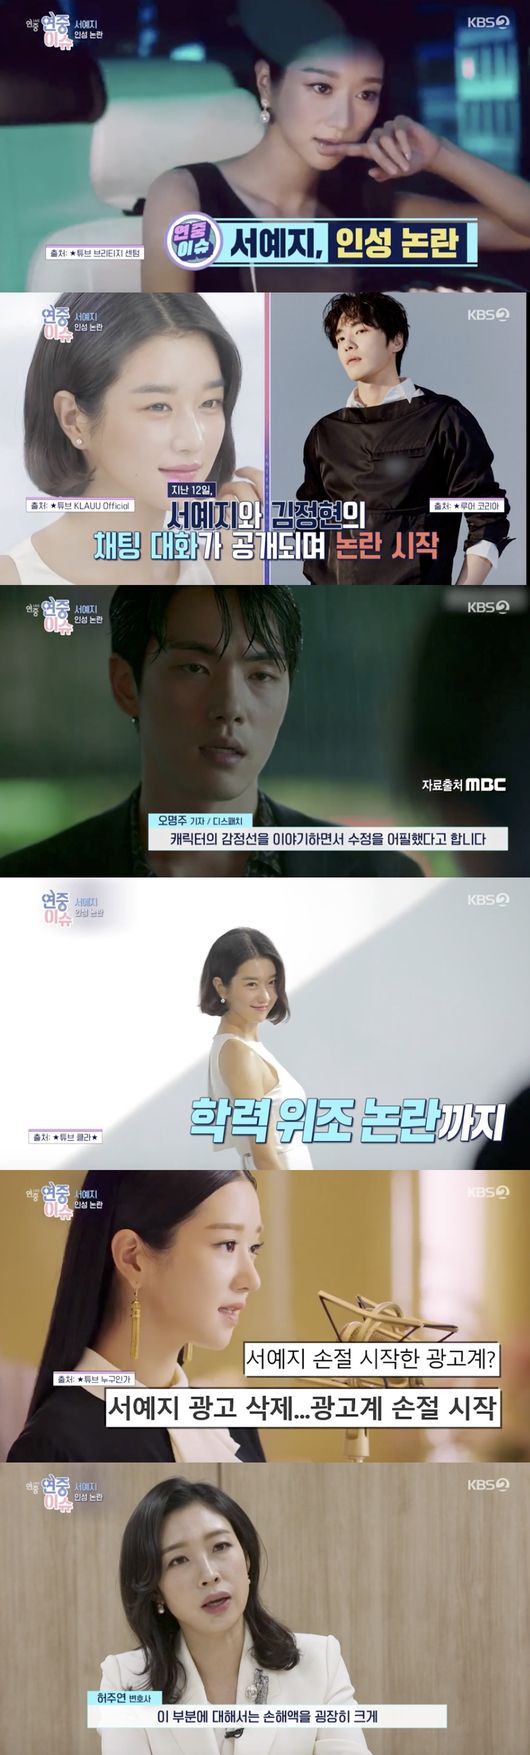 Seo Ye-ji, controversial personality controversy, lawyer’may be largely responsible for advertising penalty’ (‘Live throughout the year’)